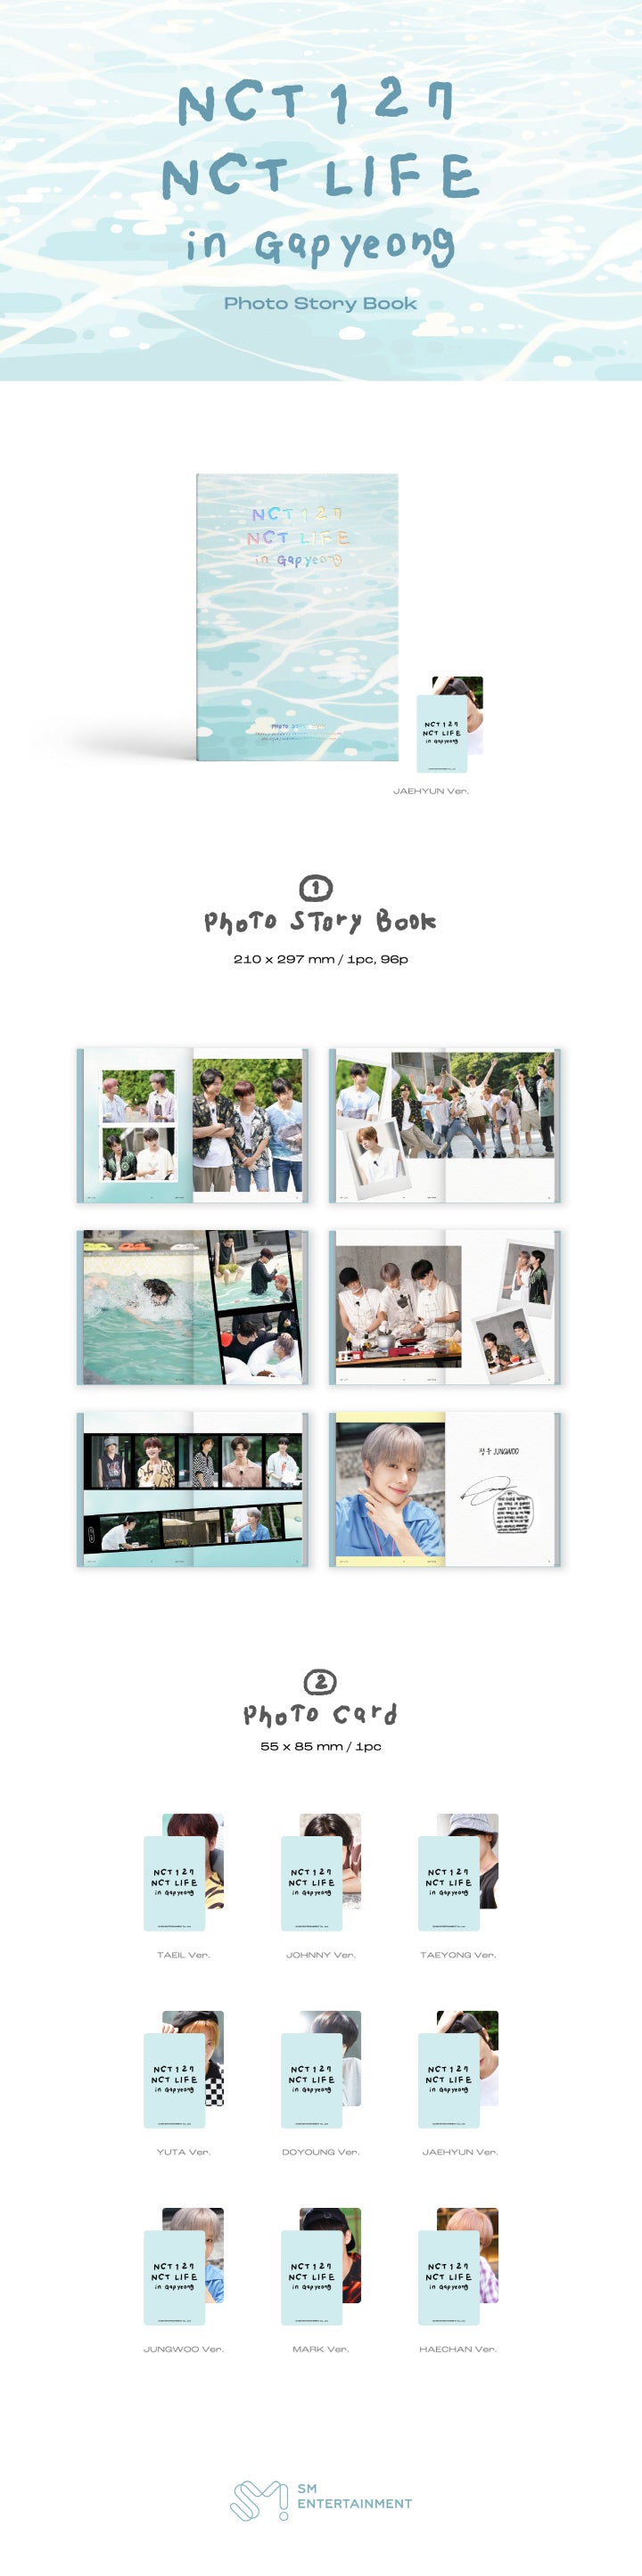 1 Photo Story Book (96 pages)
1 Photo Card